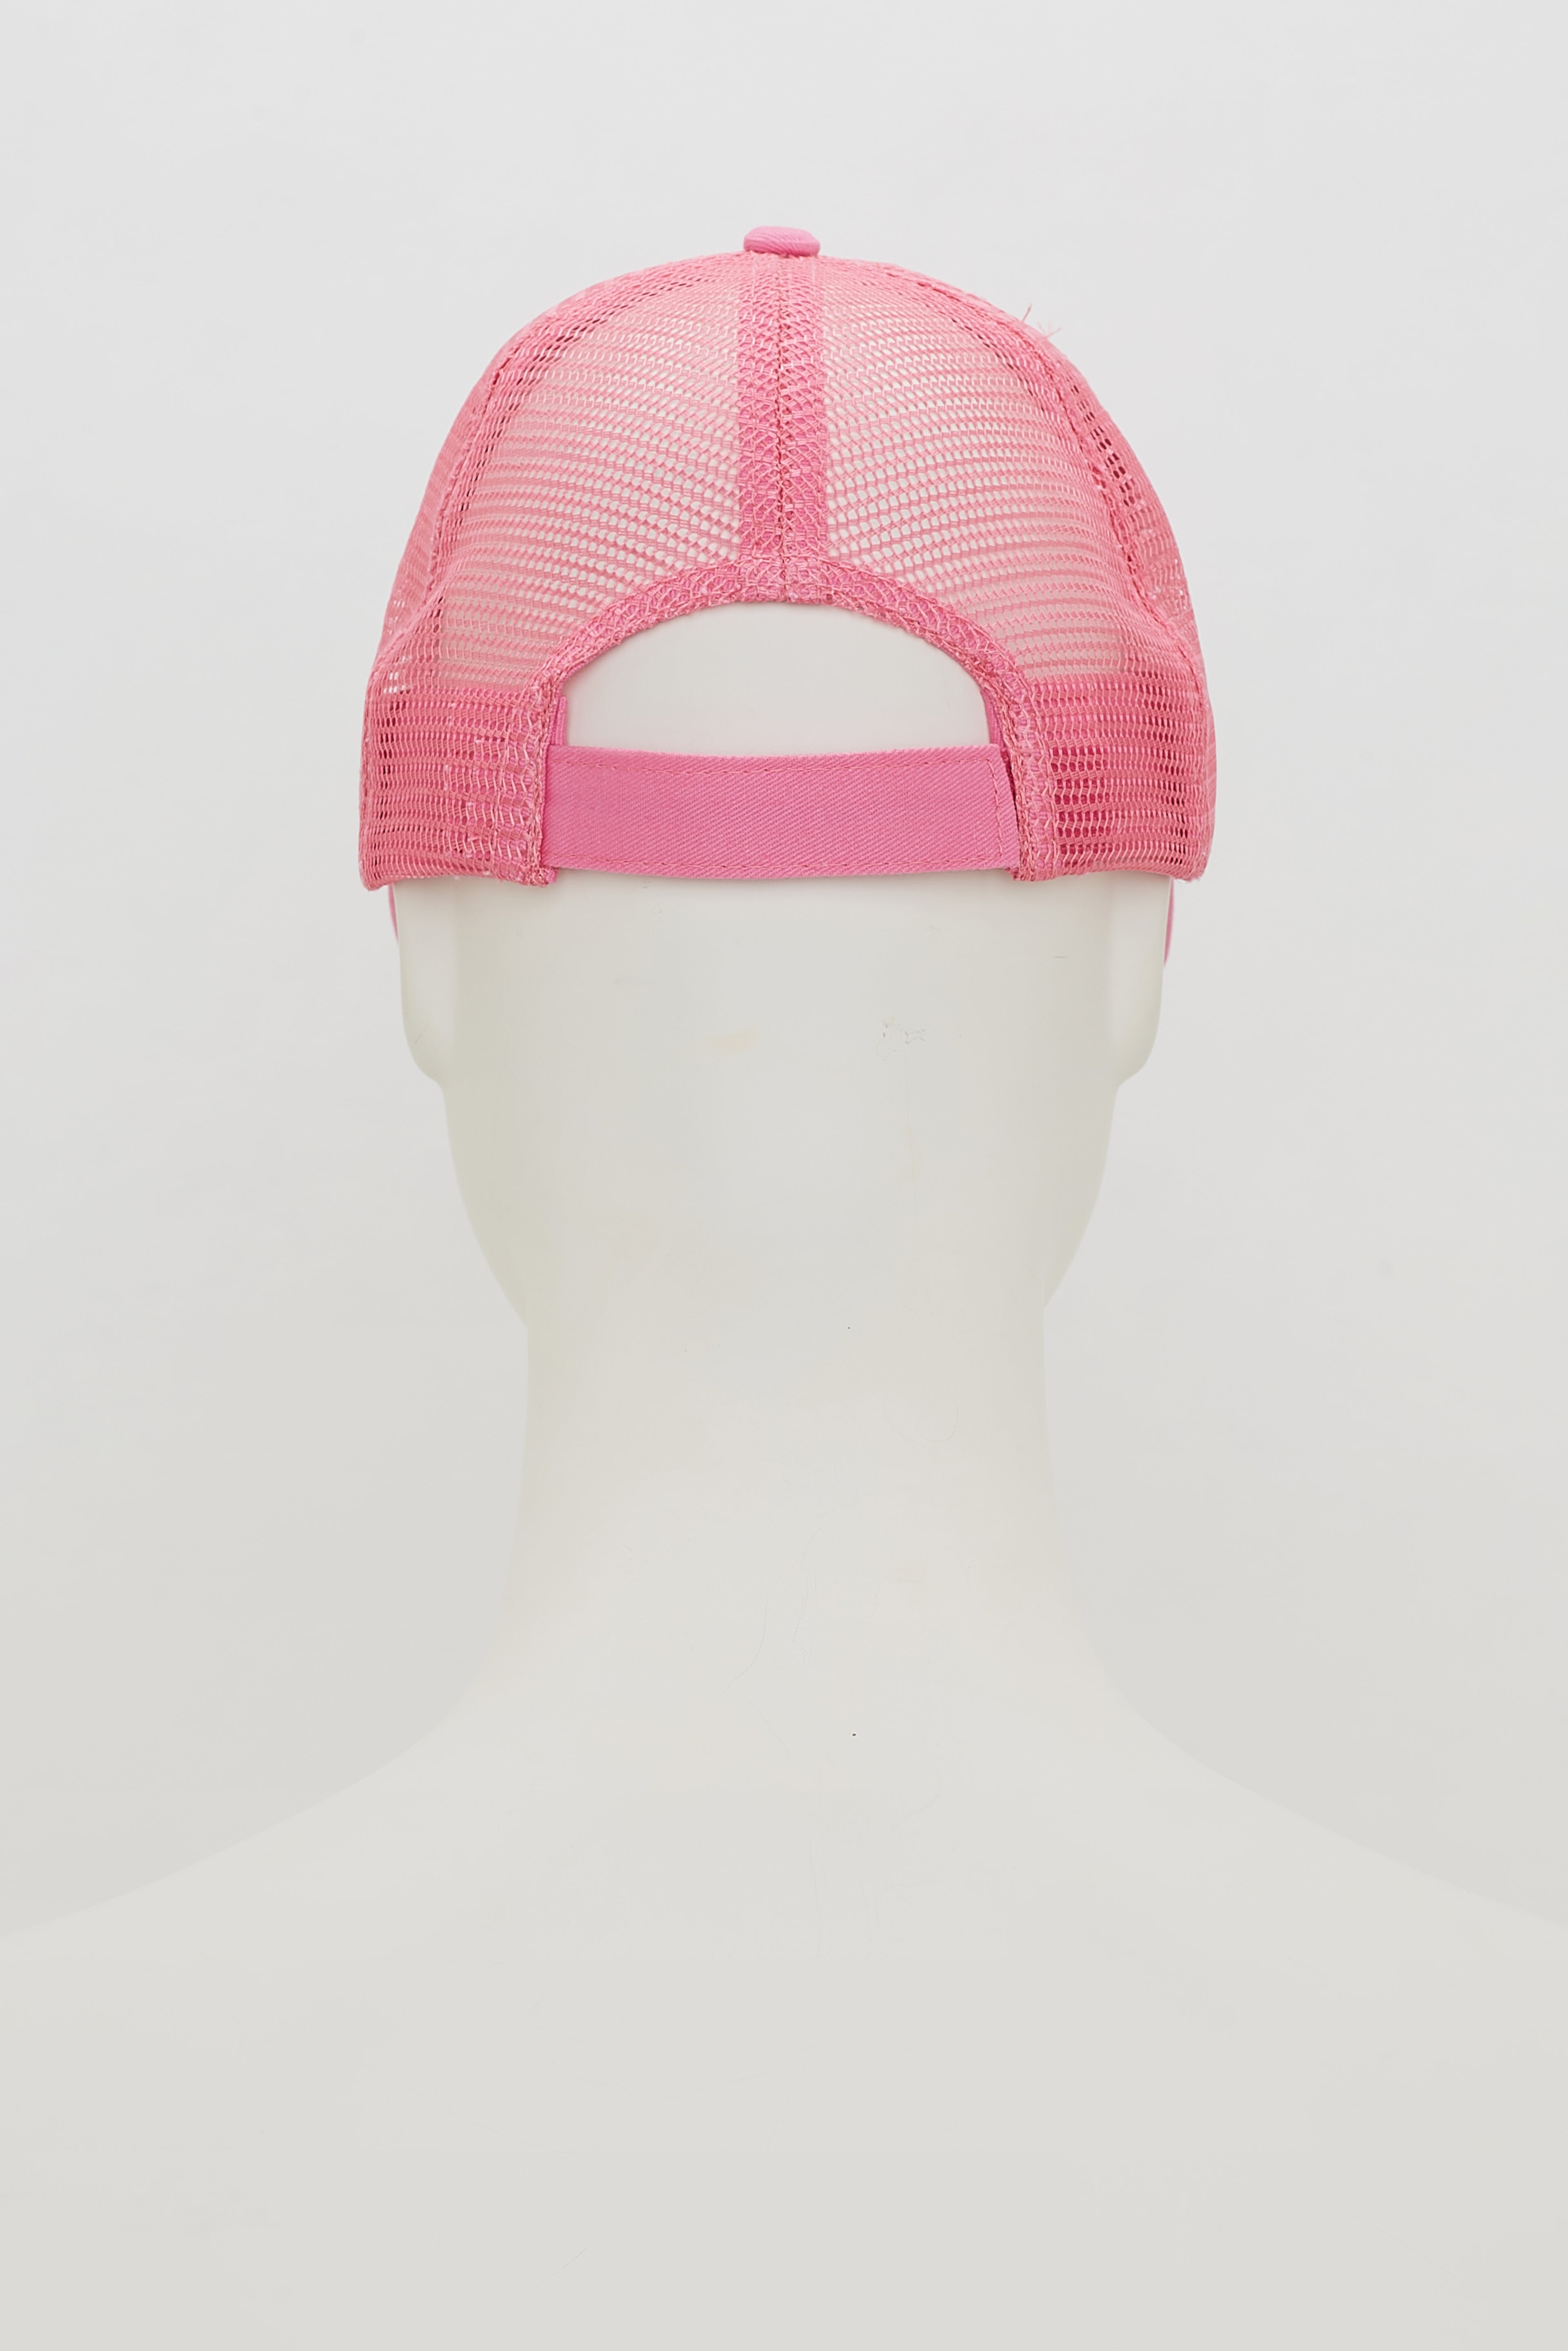 Dorothee-Schumacher-OUTLET-SALE-CHIYC-baseball-cap-Accessoires-OS-shaded-pink-3.jpg